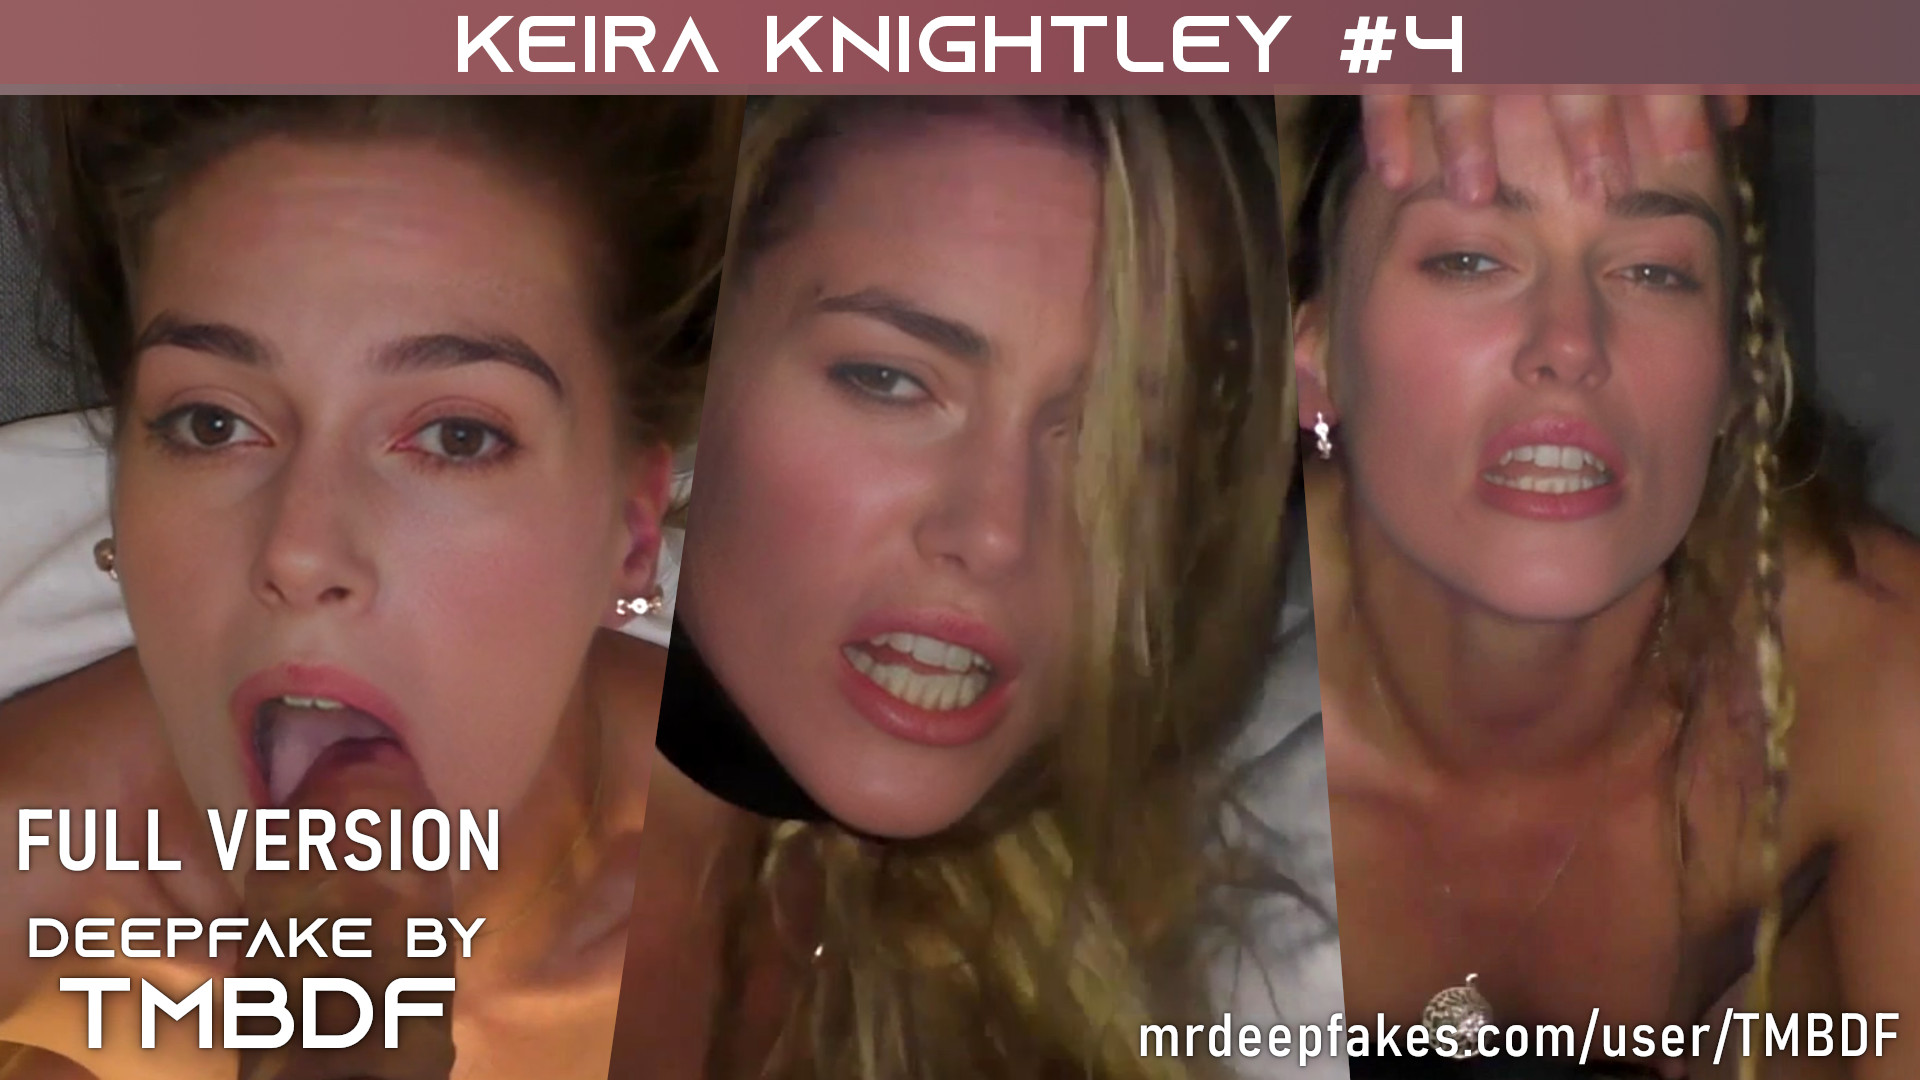 Keira Knightley #4 Full version for download (using tokens)